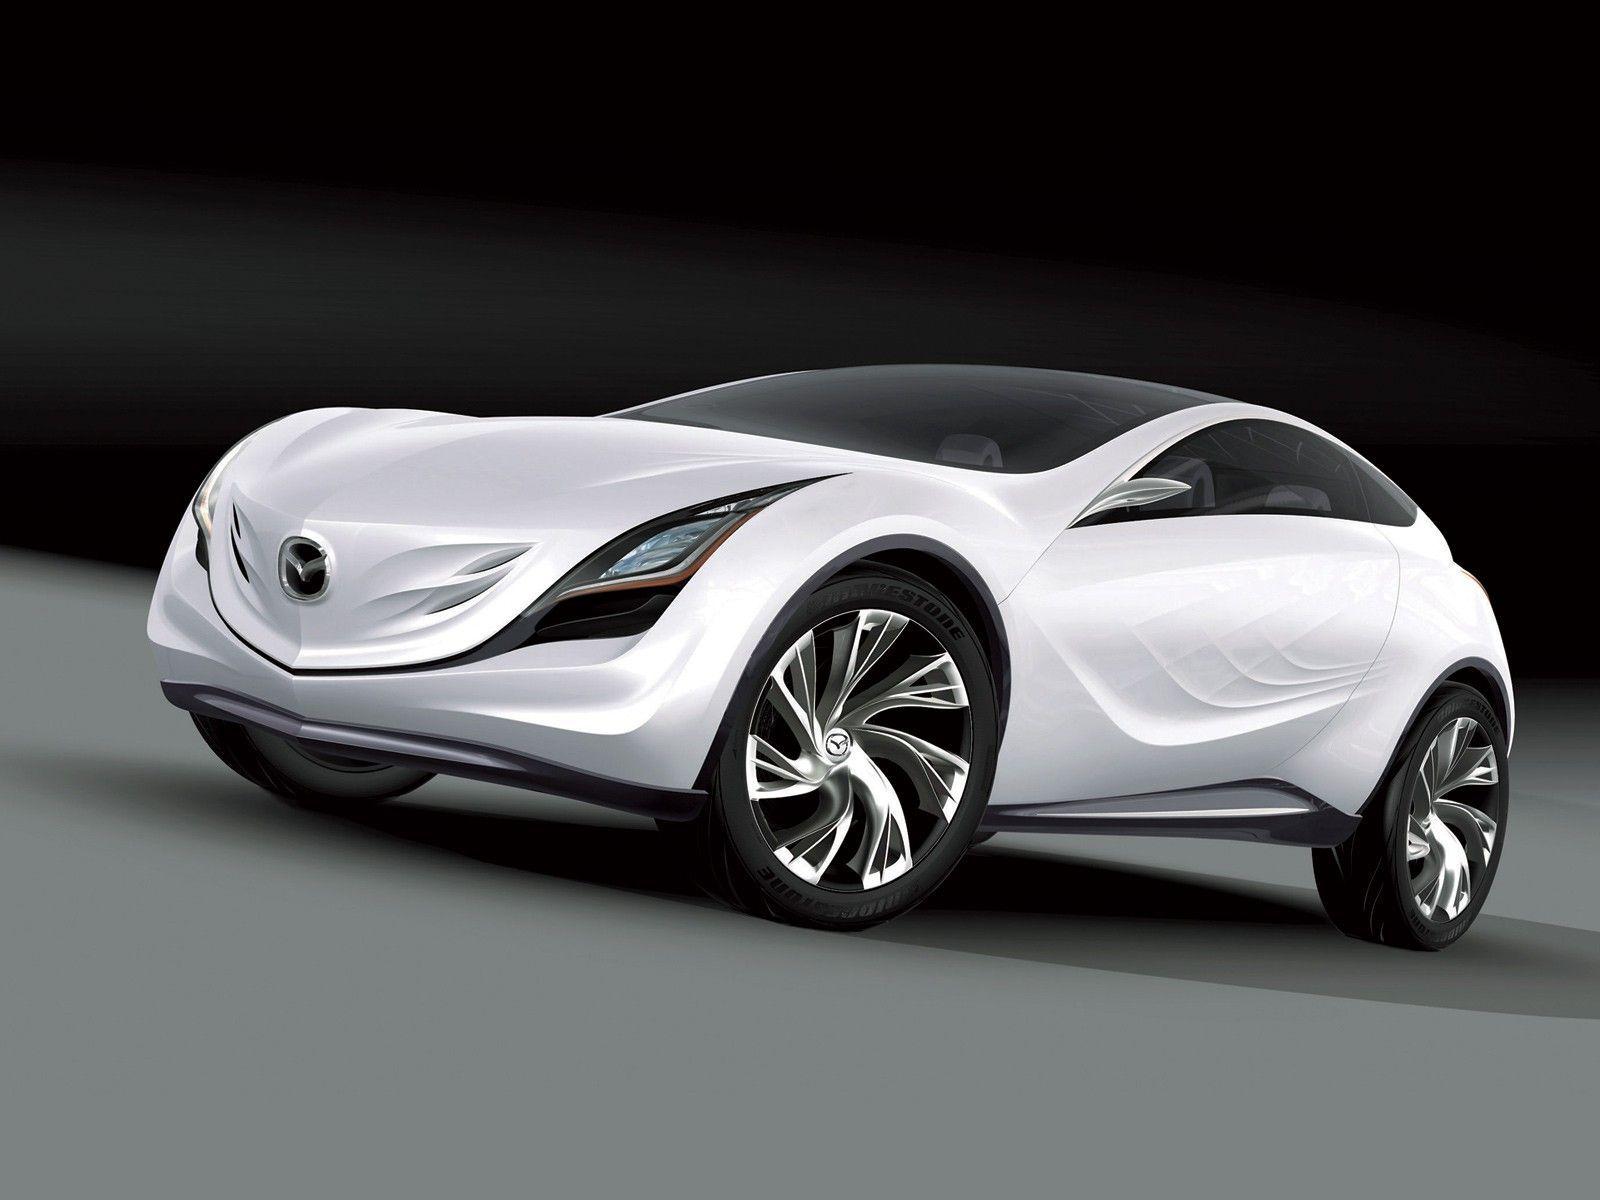 Mazda Concept Car How do you like this exotic car? Get much more